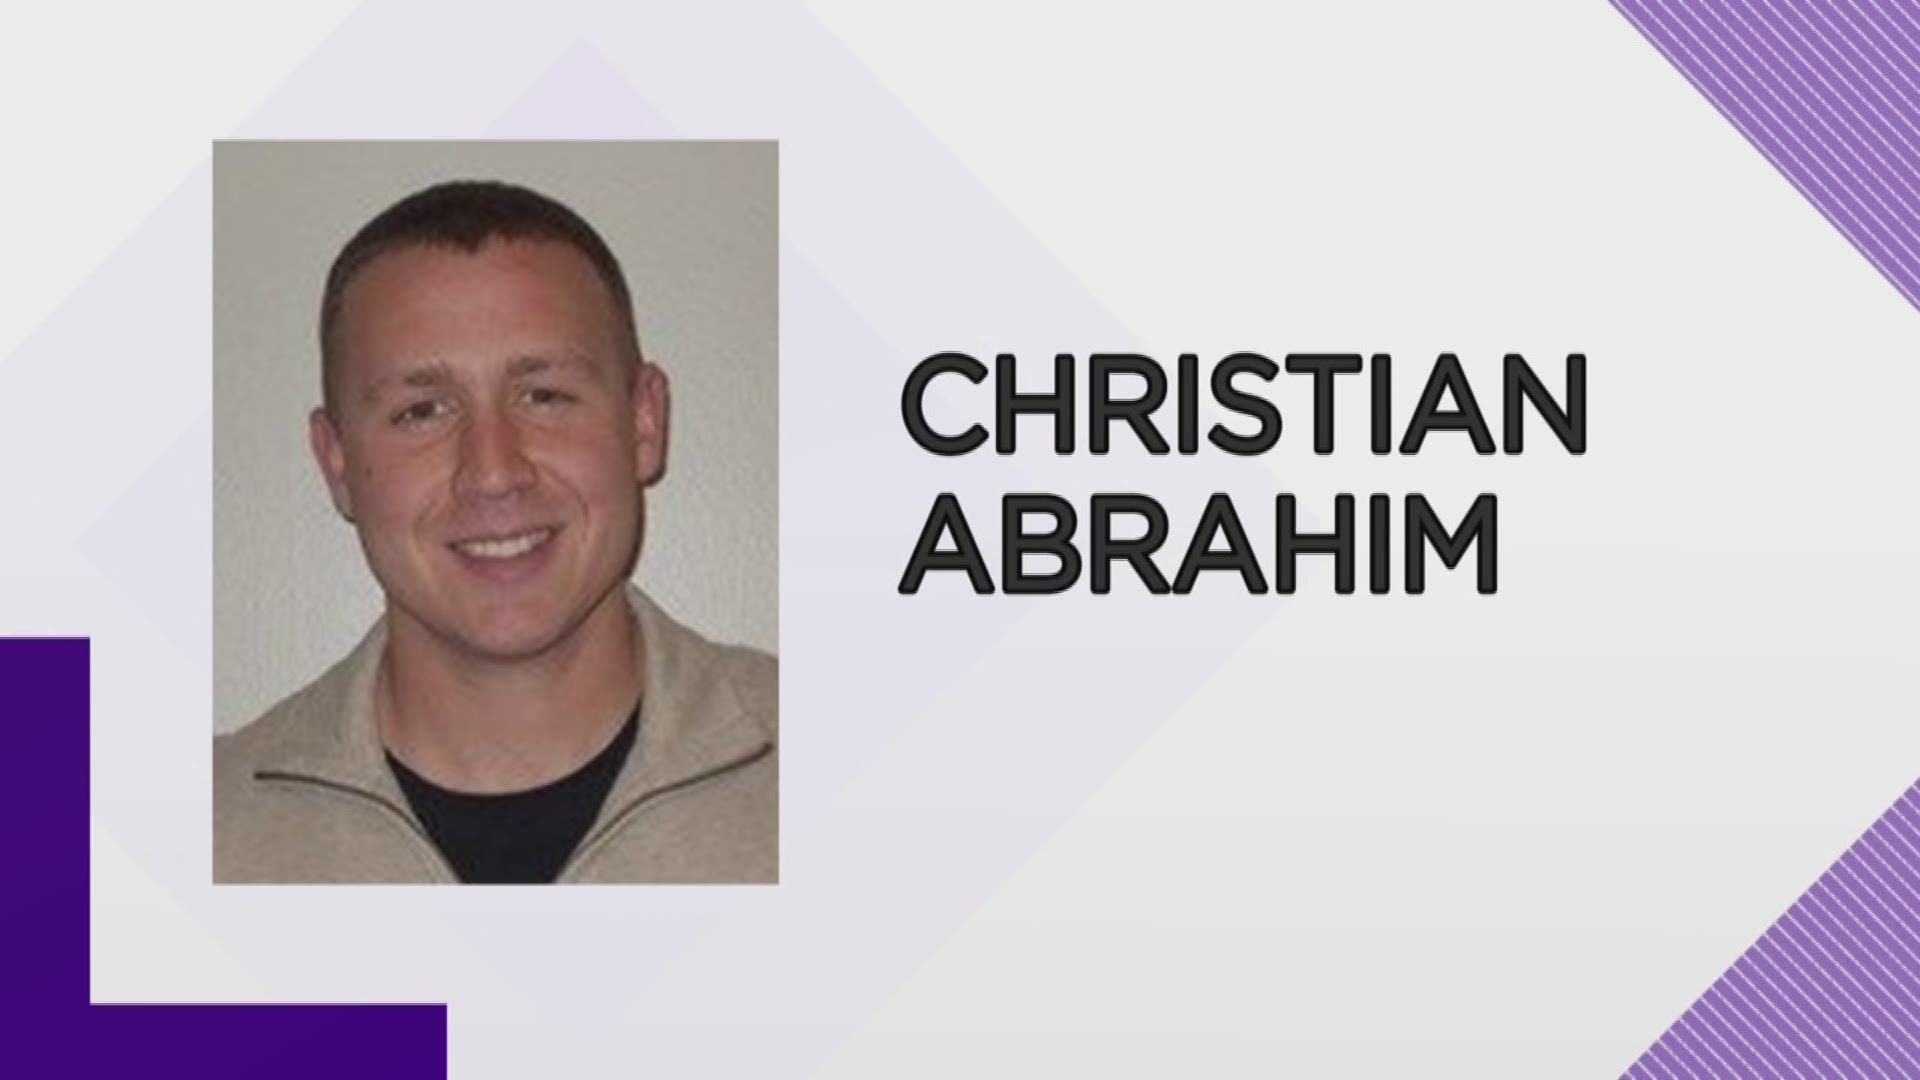 Christian Abrahim has been charged with manslaughter and criminally negligent homicide after a deadly car accident.